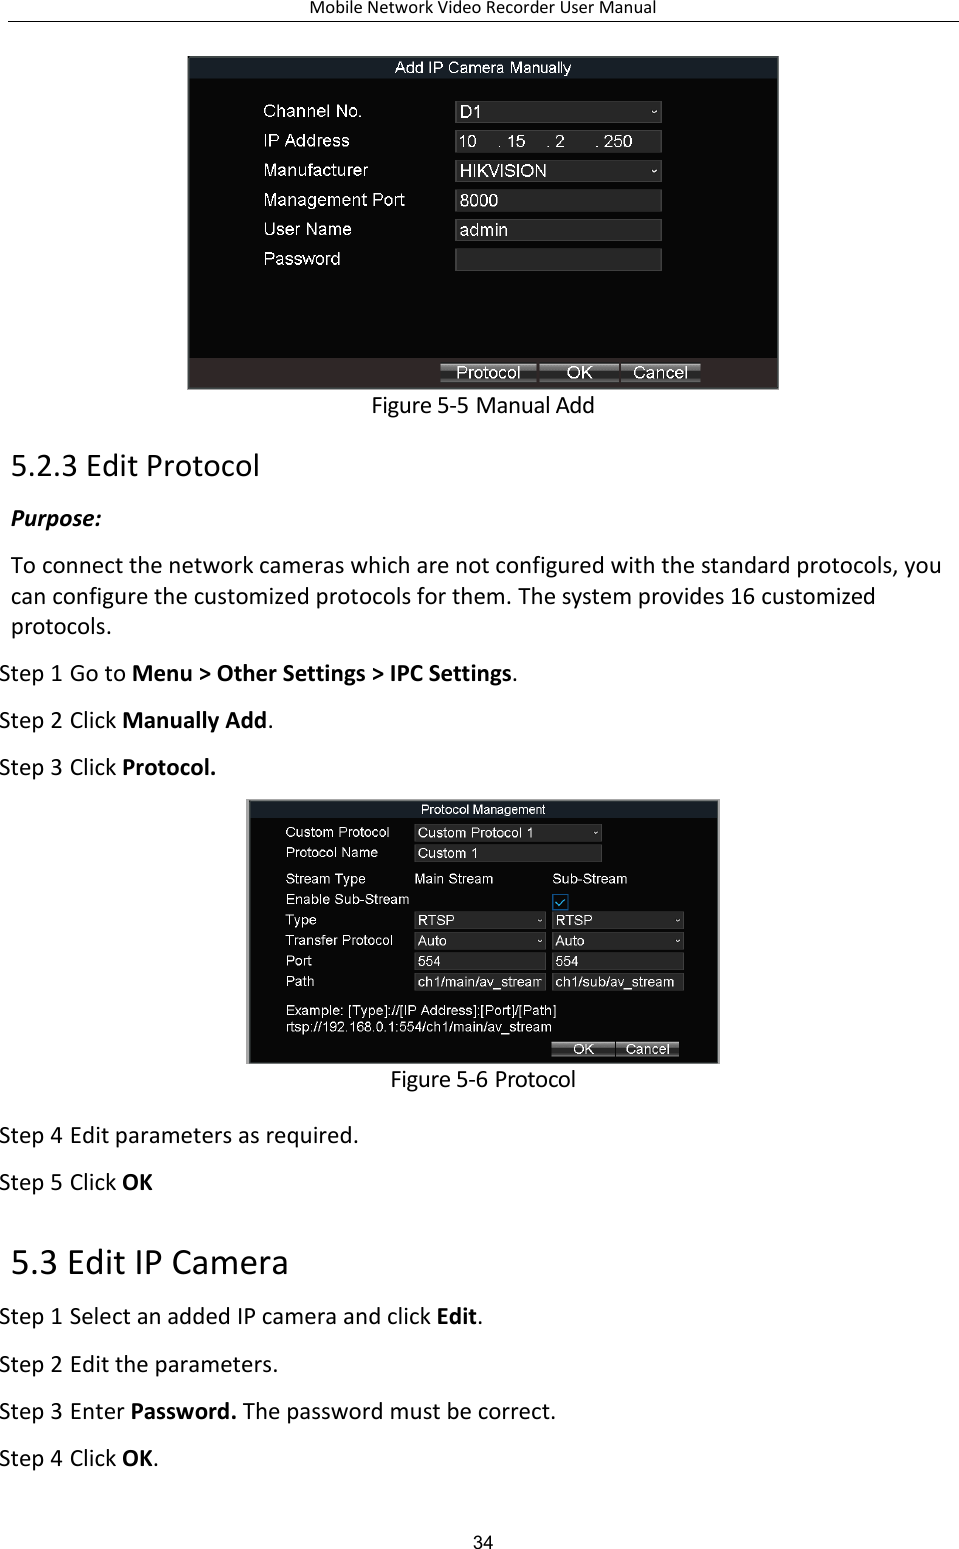 Mobile Network Video Recorder User Manual 34  Figure 5-5 Manual Add 5.2.3 Edit Protocol Purpose: To connect the network cameras which are not configured with the standard protocols, you can configure the customized protocols for them. The system provides 16 customized protocols. Step 1 Go to Menu &gt; Other Settings &gt; IPC Settings. Step 2 Click Manually Add. Step 3 Click Protocol.  Figure 5-6 Protocol Step 4 Edit parameters as required. Step 5 Click OK 5.3 Edit IP Camera Step 1 Select an added IP camera and click Edit. Step 2 Edit the parameters.   Step 3 Enter Password. The password must be correct. Step 4 Click OK. 